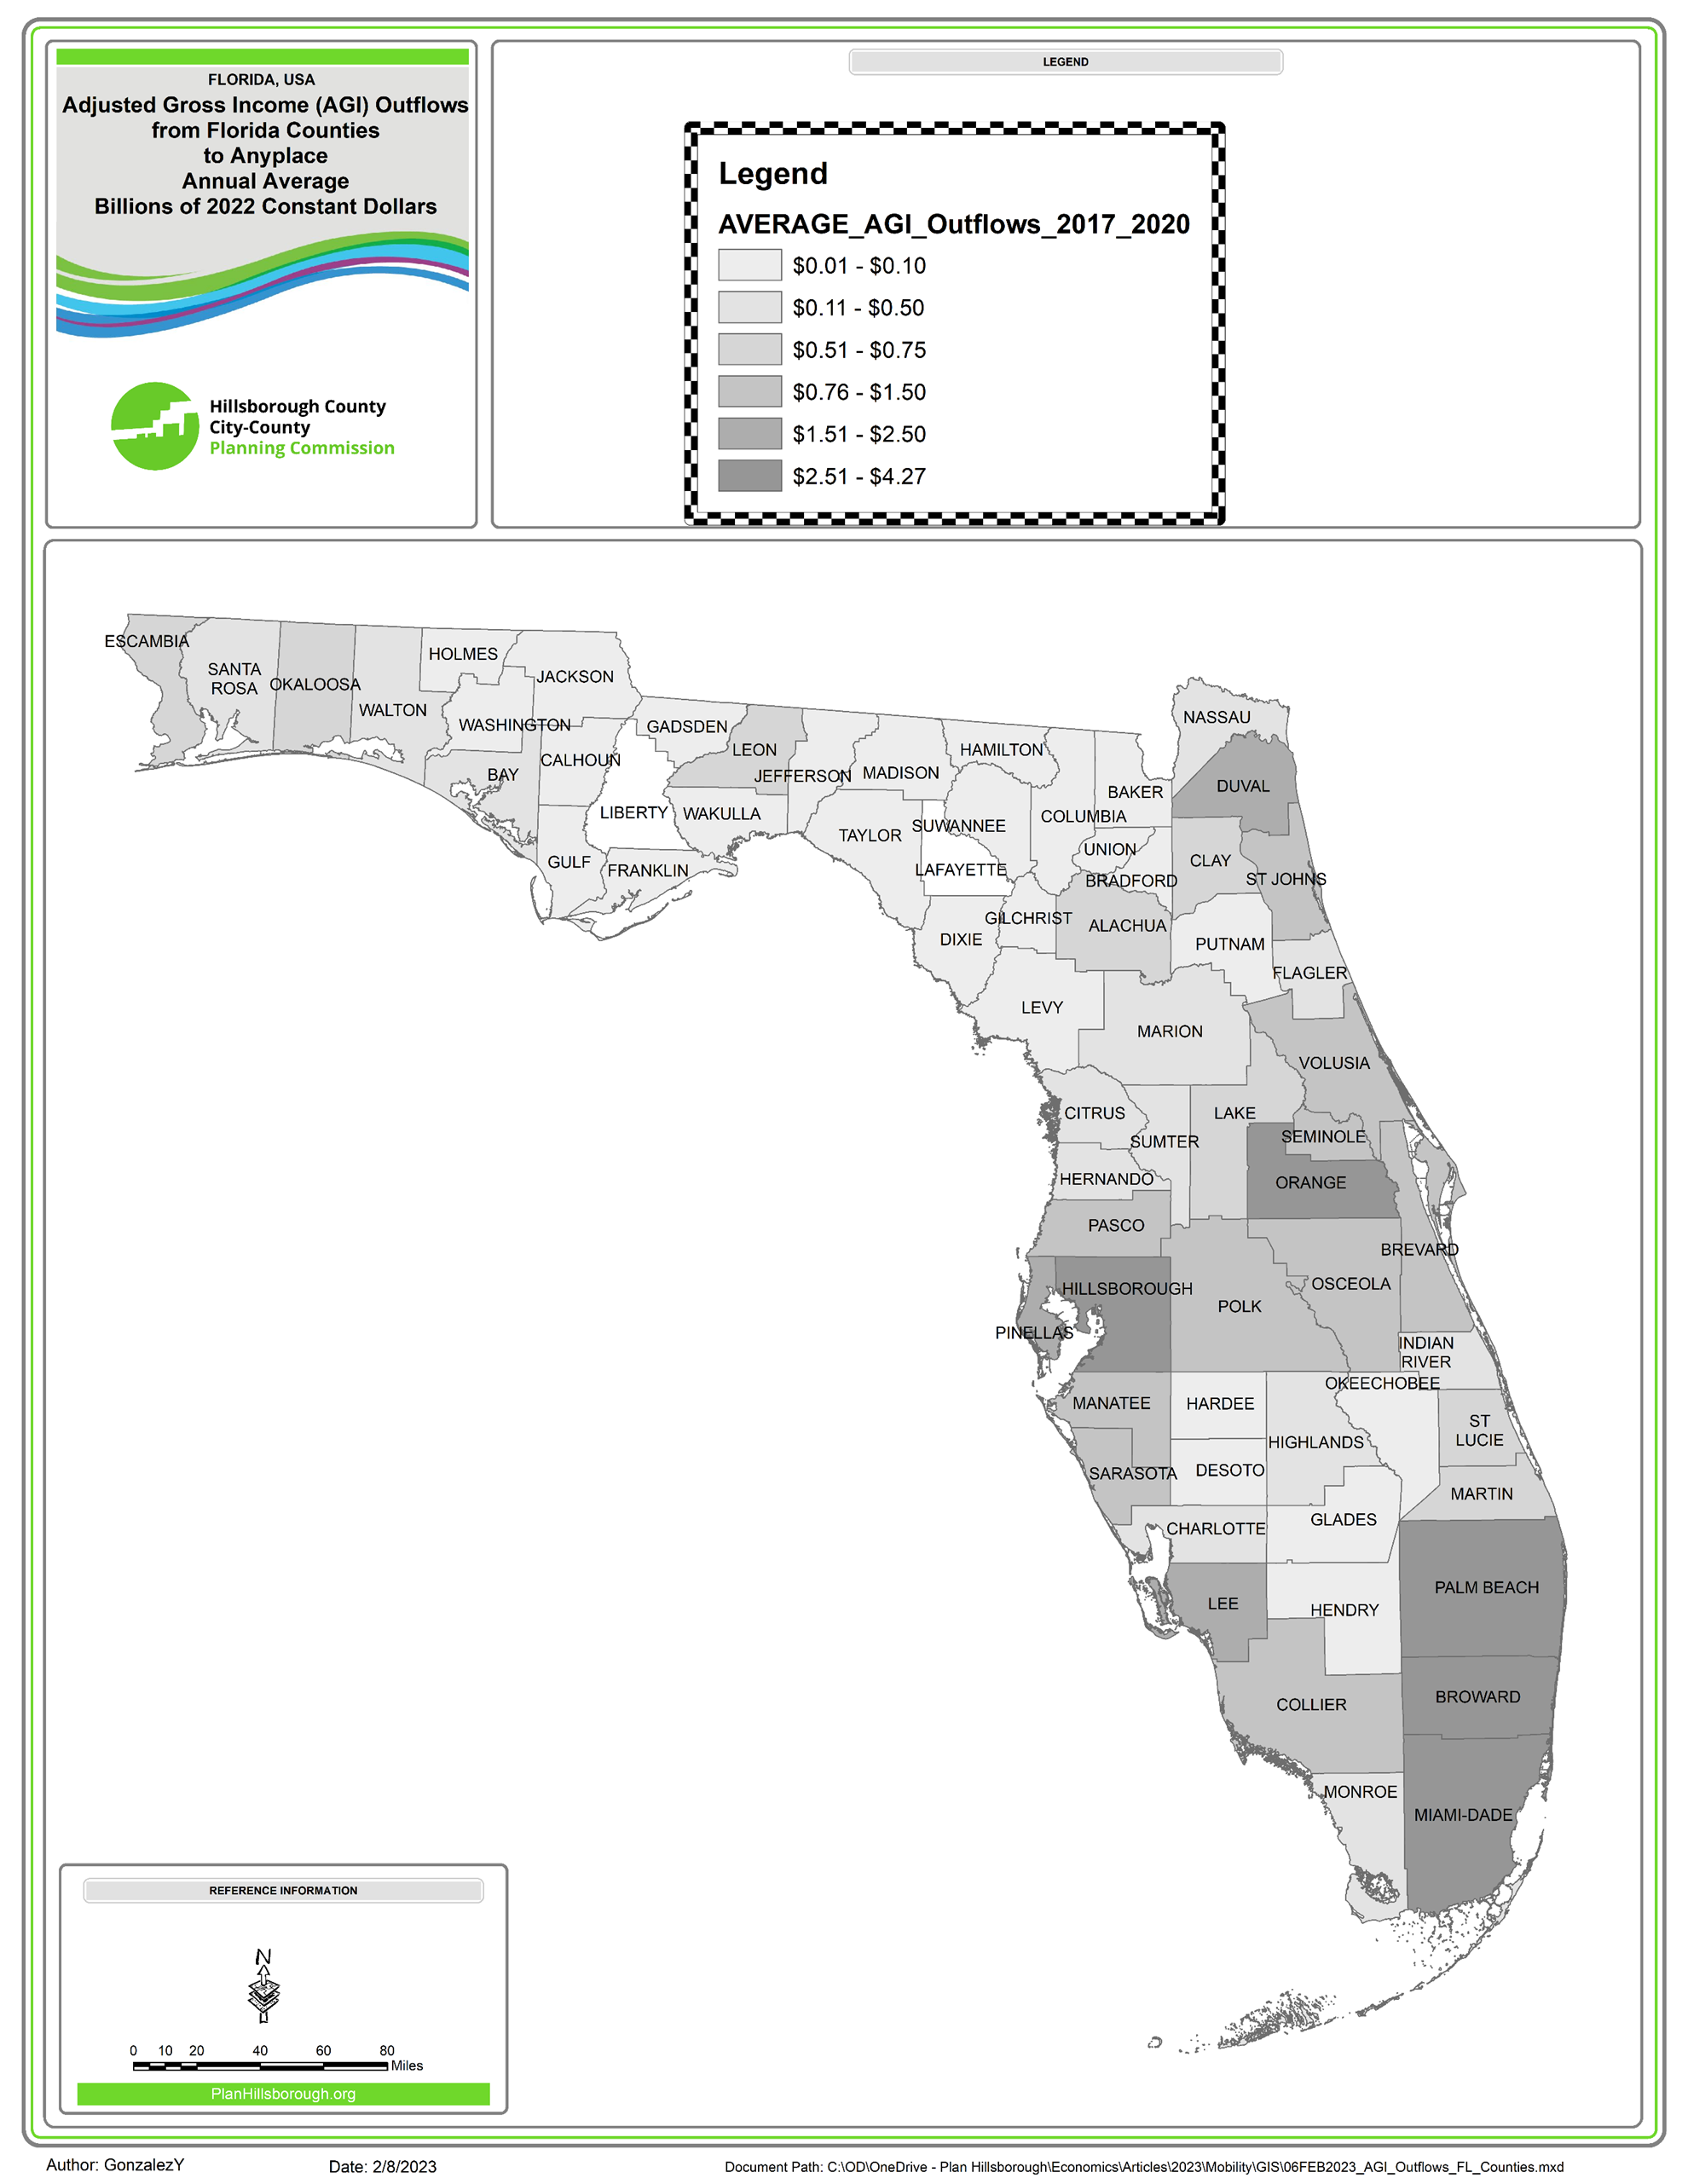 Map shows counties in Florida.  It also indicates how much AGI is leaving that county to move elsewhere.  Hillsborough and Pinellas Counties are losing over $1.51 billion per year.